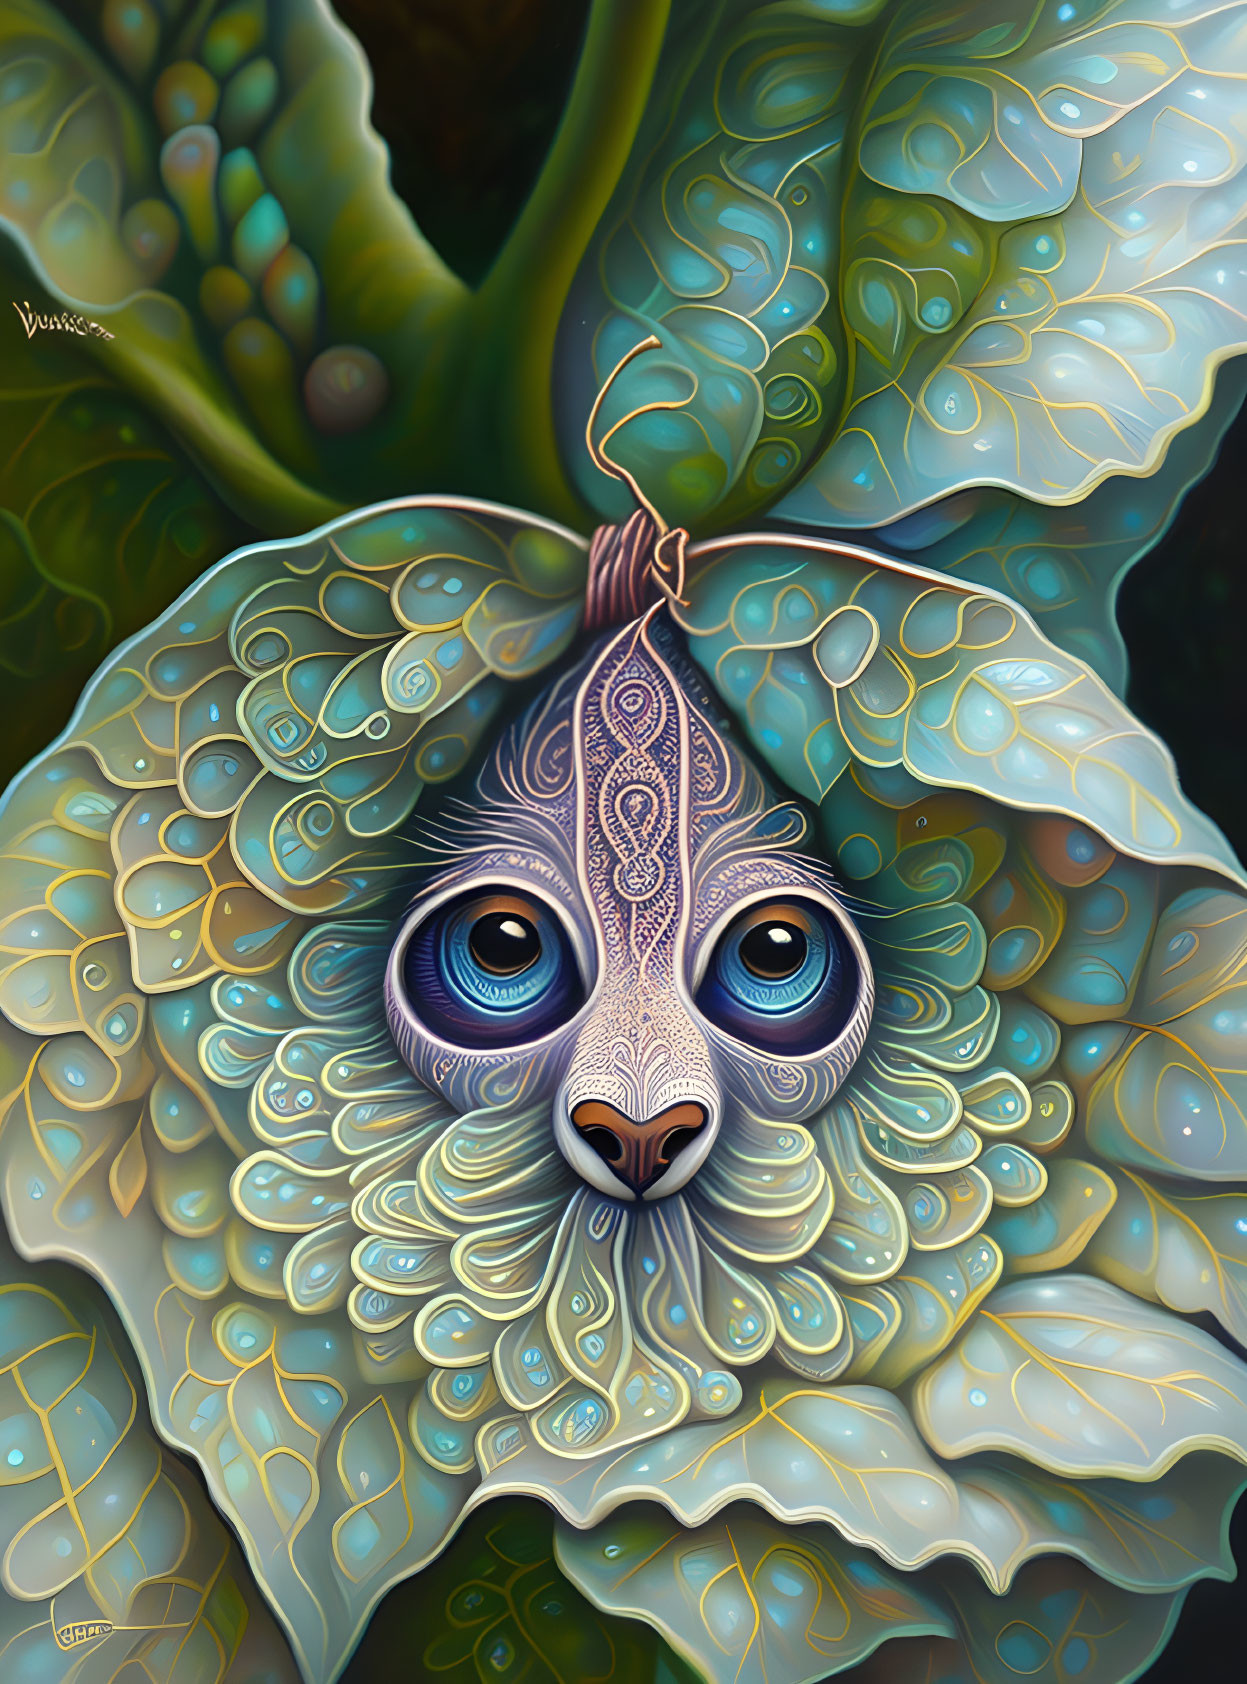 Illustration of mystical creature with blue eyes and ornate facial features.